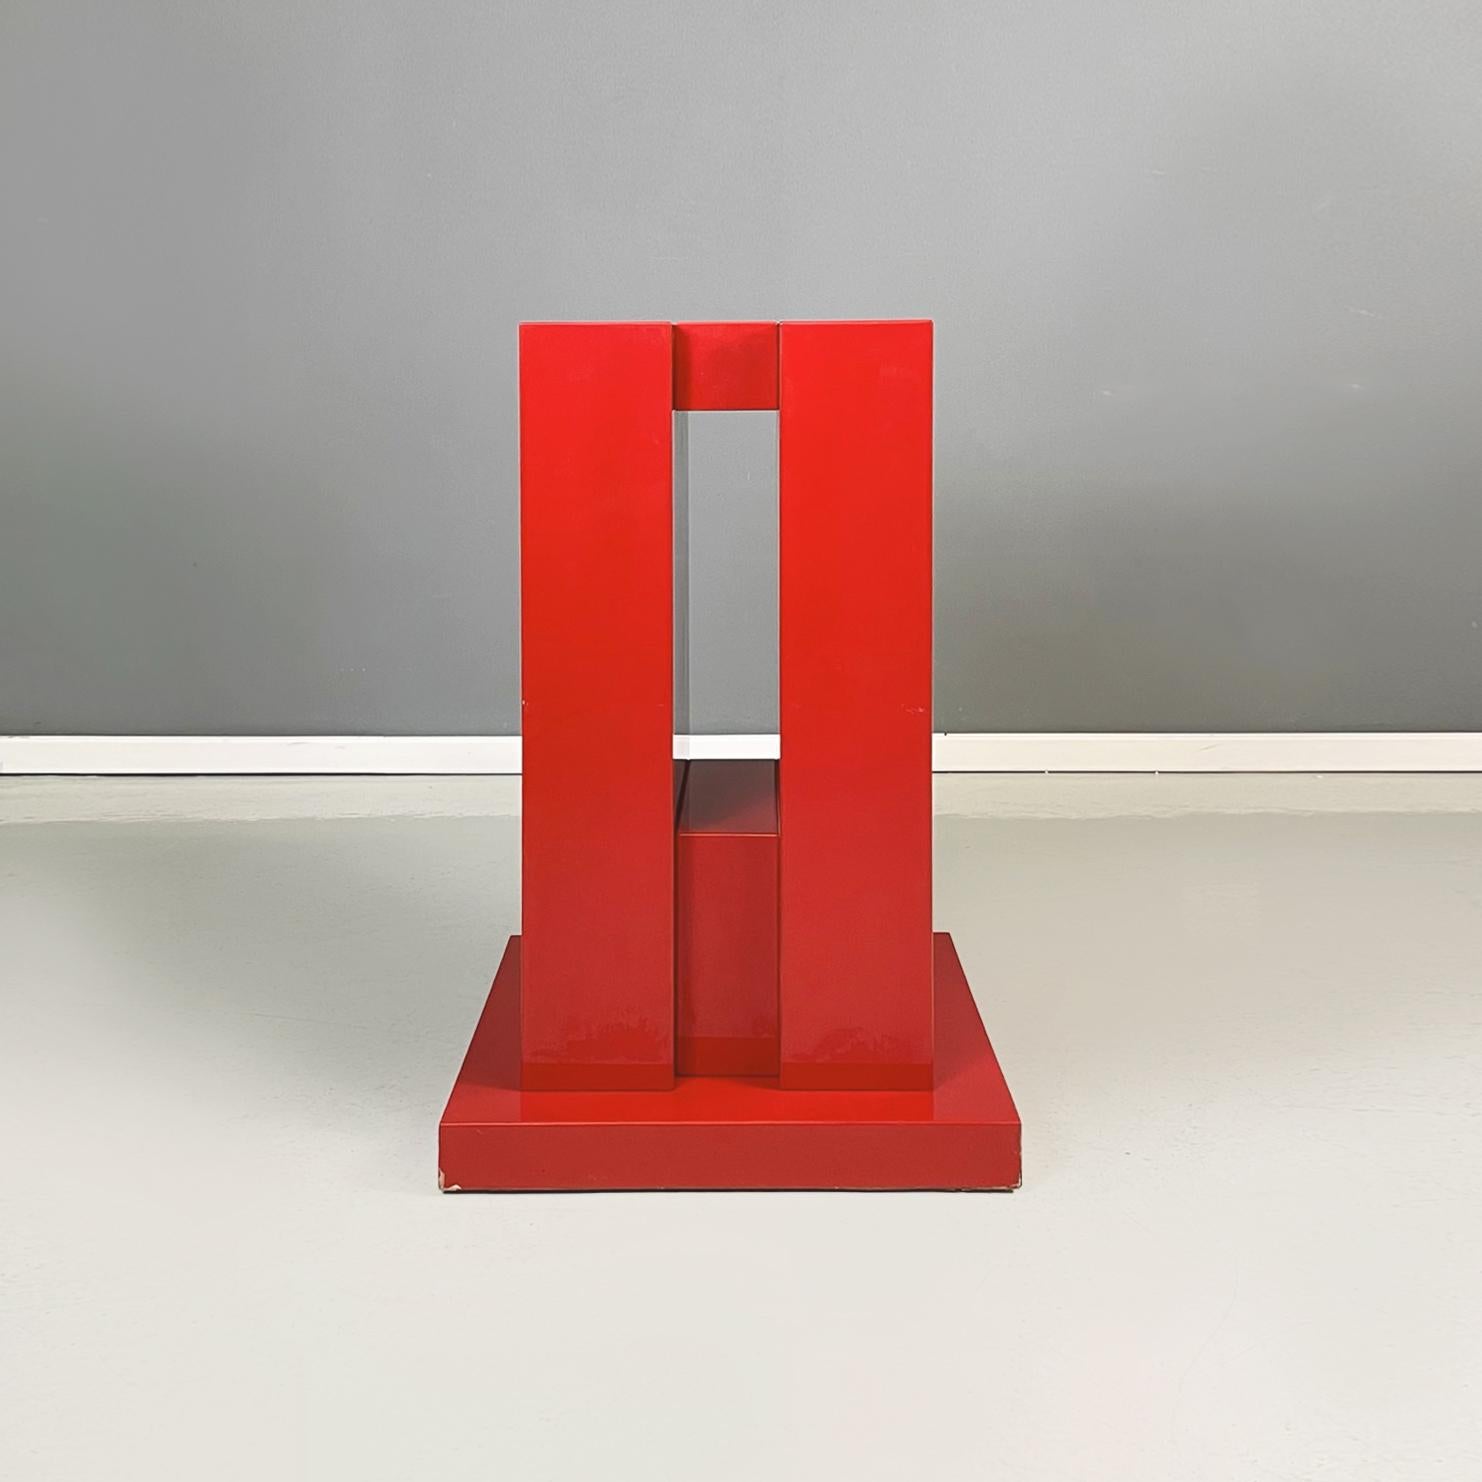 Italian mid-century Black and light wooden square pedestals with wavy profile, 1960s
Geometric pedestal with a square base, composed by assembling a series of parallelepipeds in red lacquered wood. In the center there is a vertical